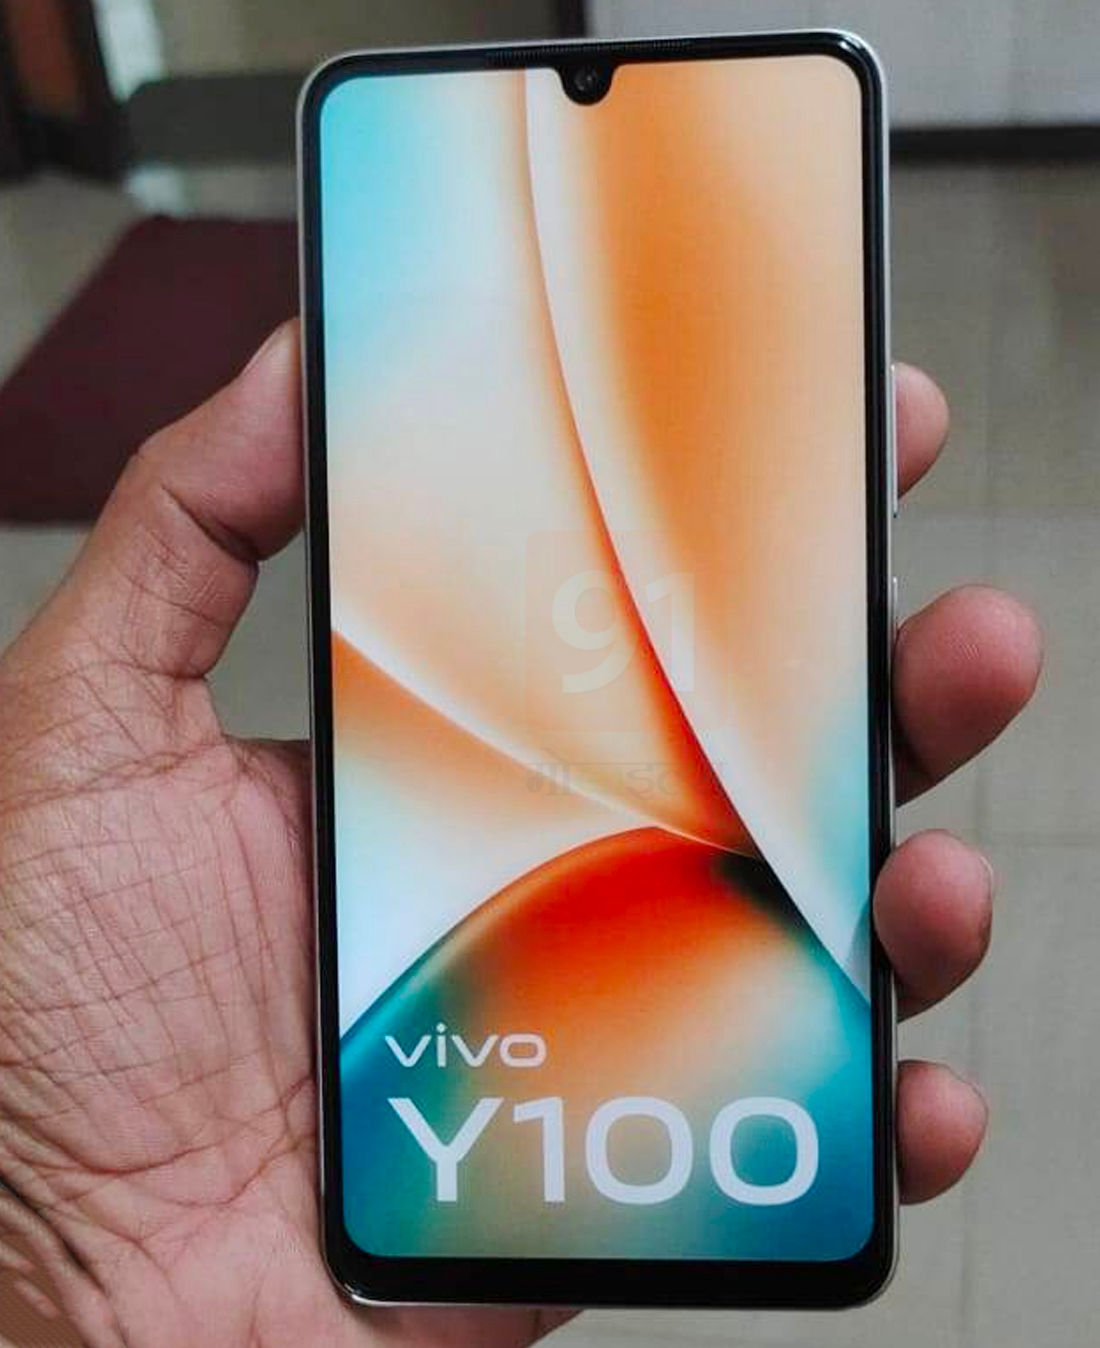 Vivo Y100 design and color variants revealed in Exclusive news ahead of india launch